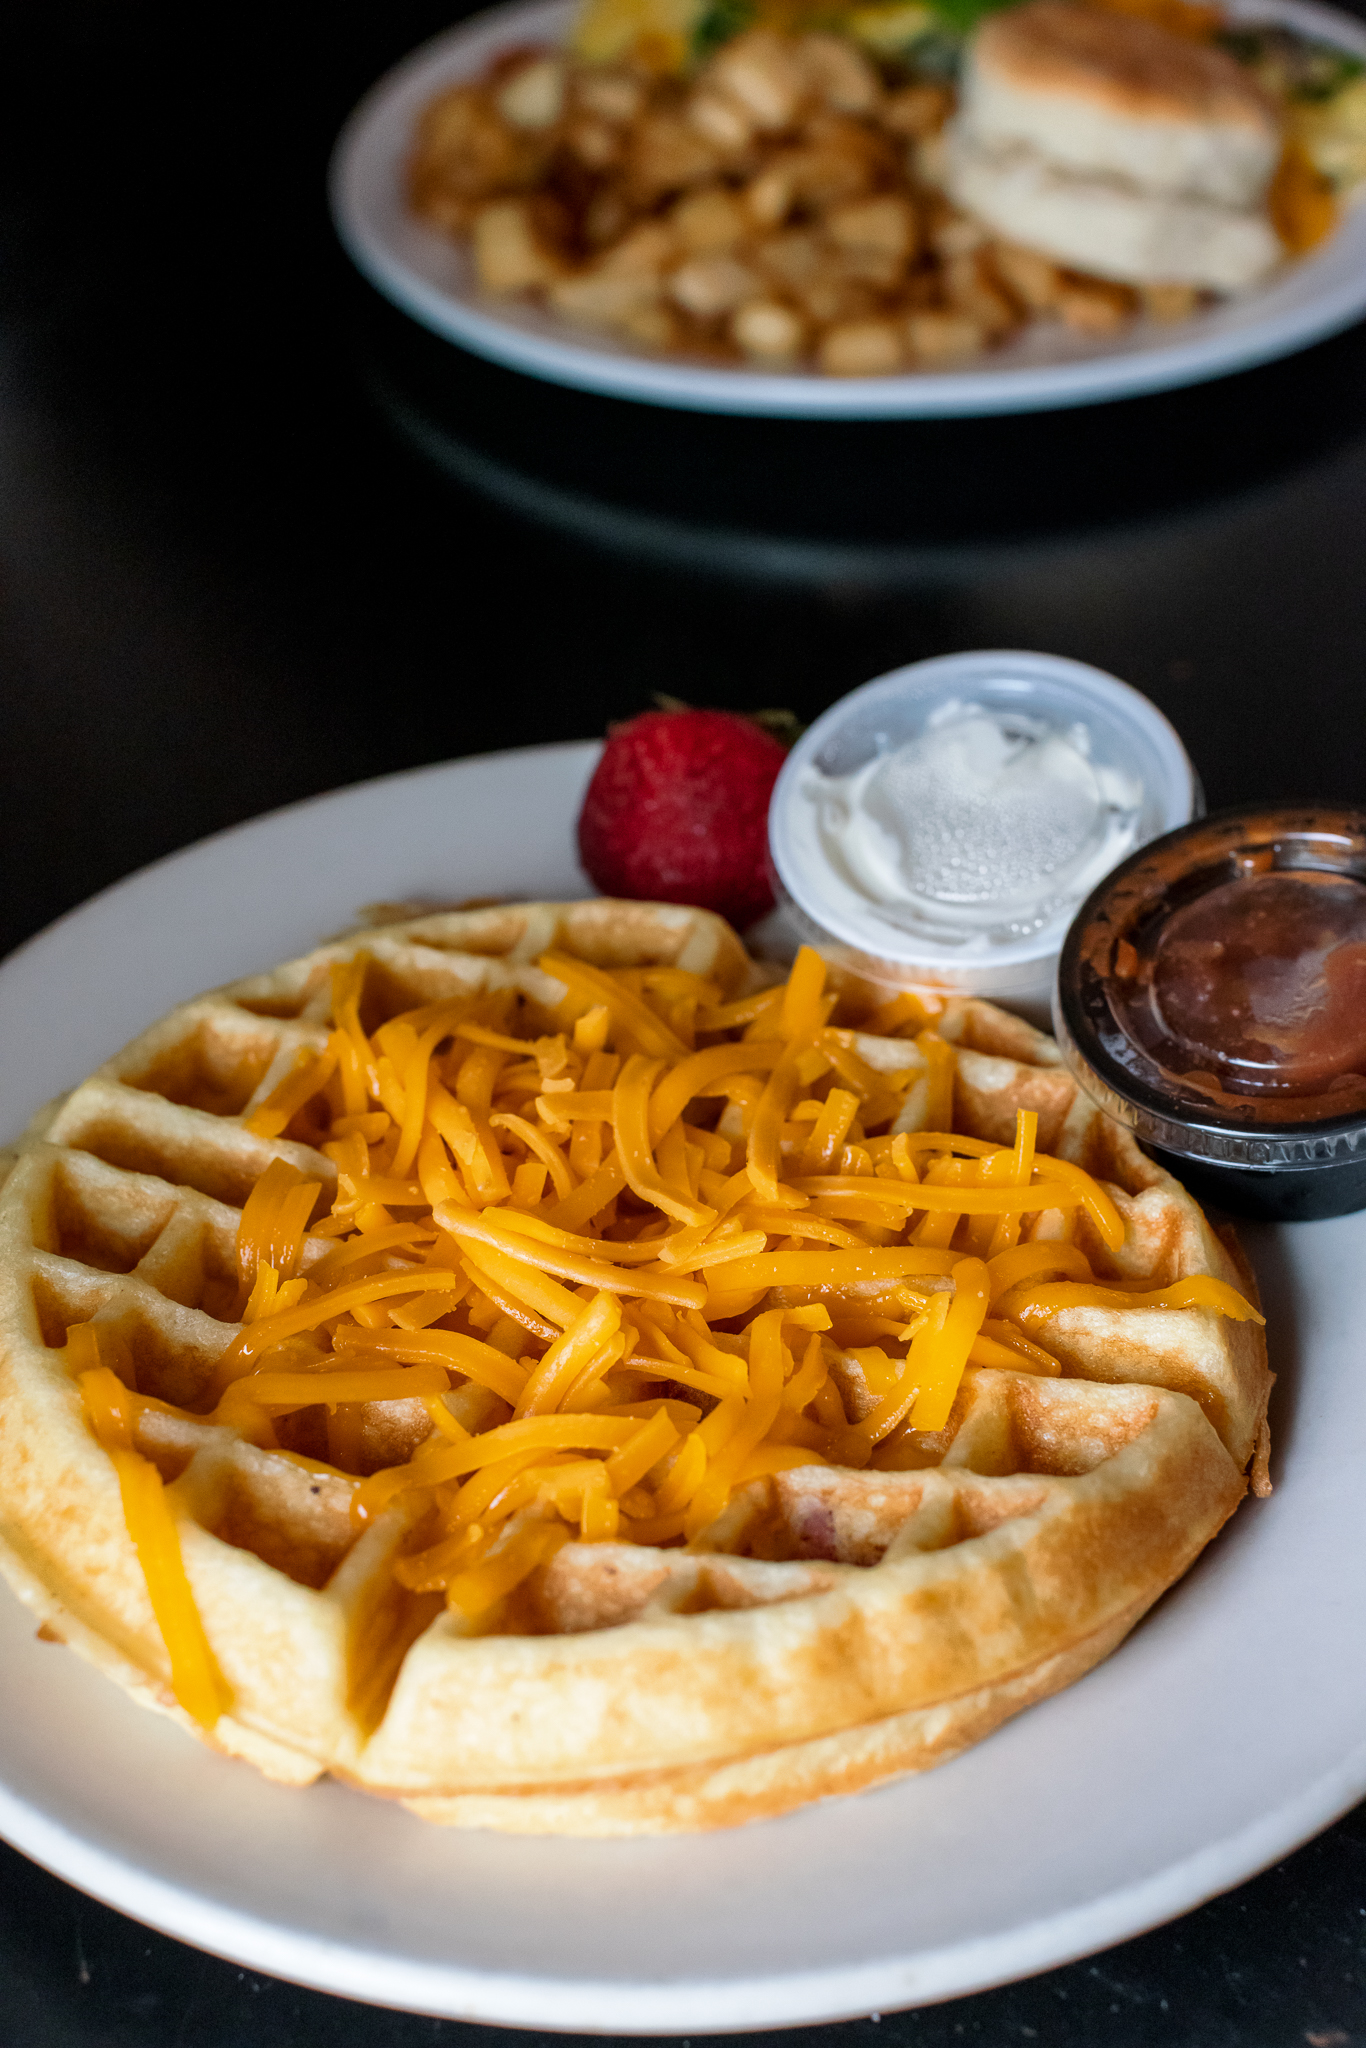 Savory waffle from Auke Bay Cafe in Juneau